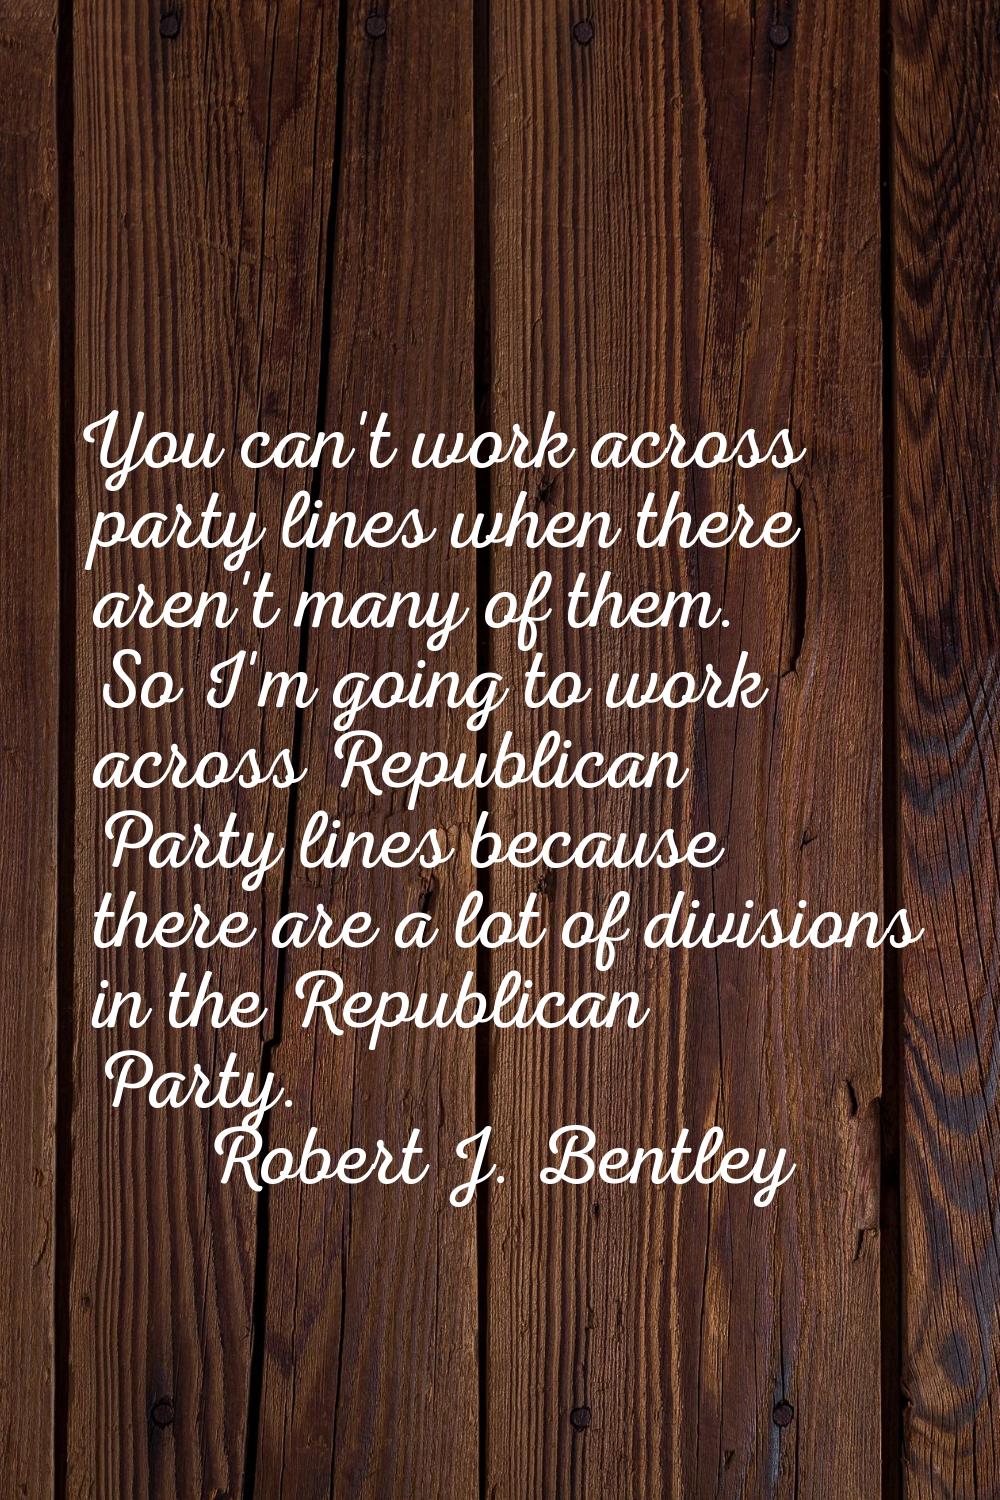 You can't work across party lines when there aren't many of them. So I'm going to work across Repub